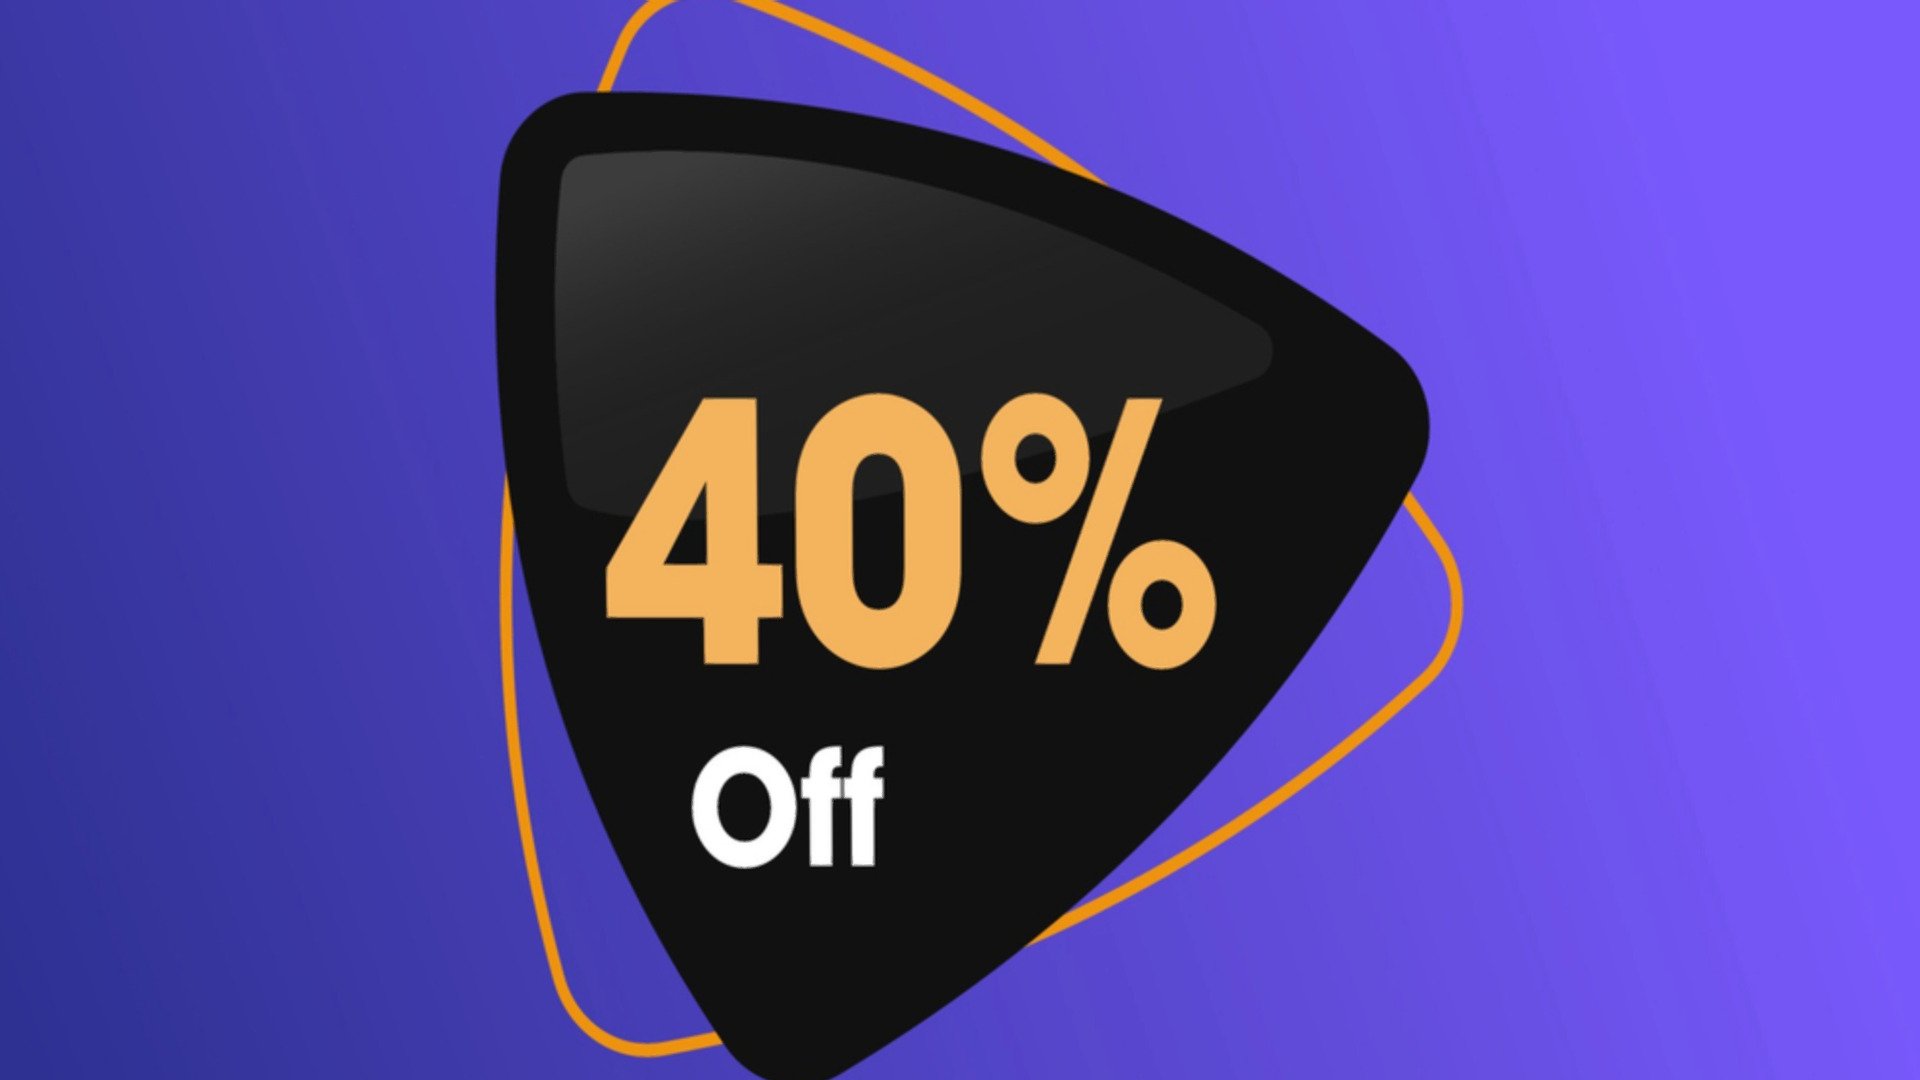 40% DISCOUNT TO CELEBRATE OUR WEBSITE LAUNCH 🎉👏🤩

We have just launched our website and to celebrate for a limited time we are offering a great discount on all products. Use coupon code &ldquo;40